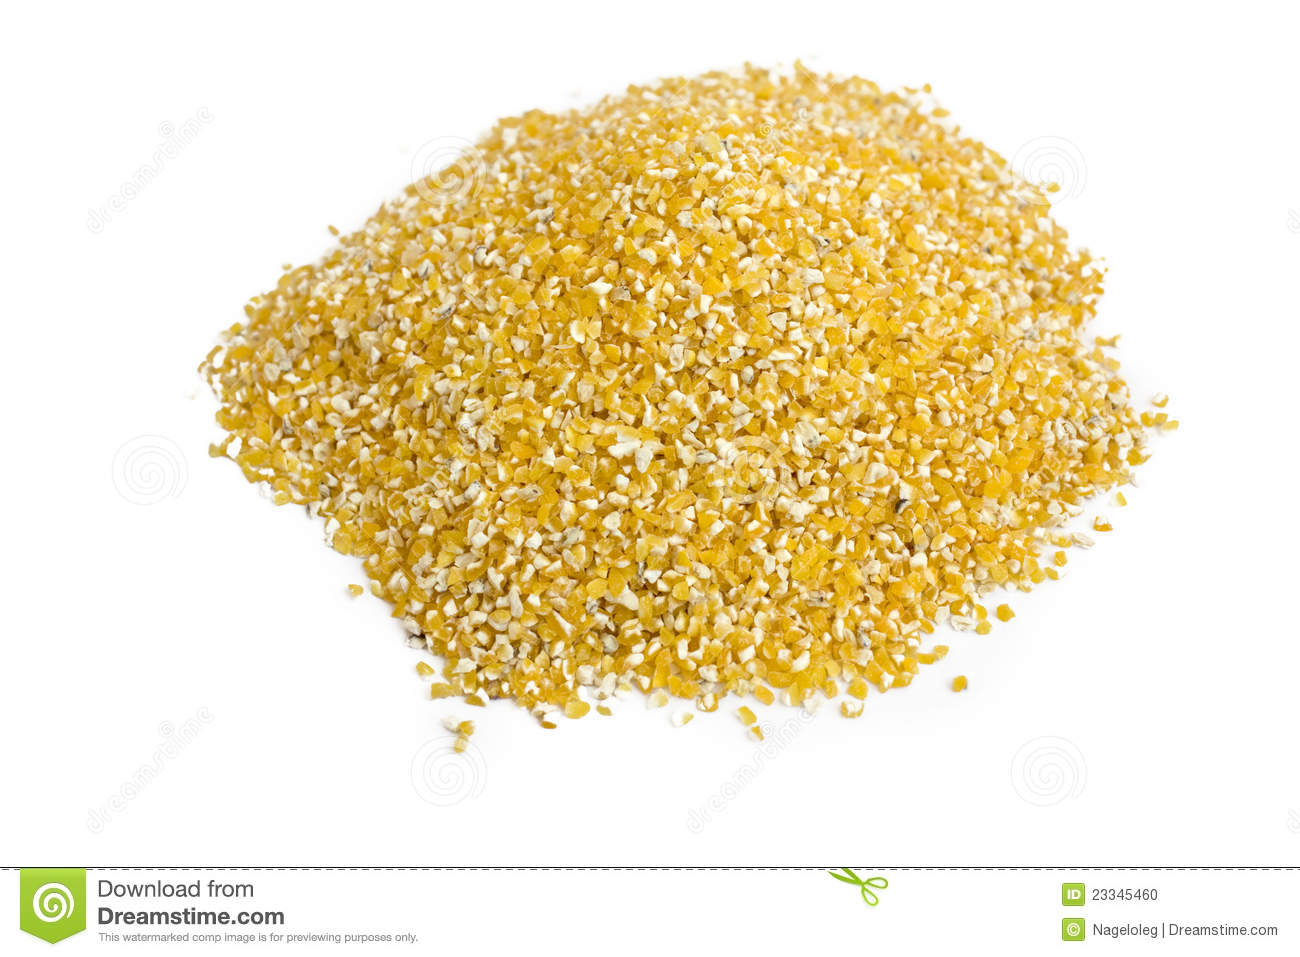 Pile Of Corn Grits Stock Photo   Image  23345460